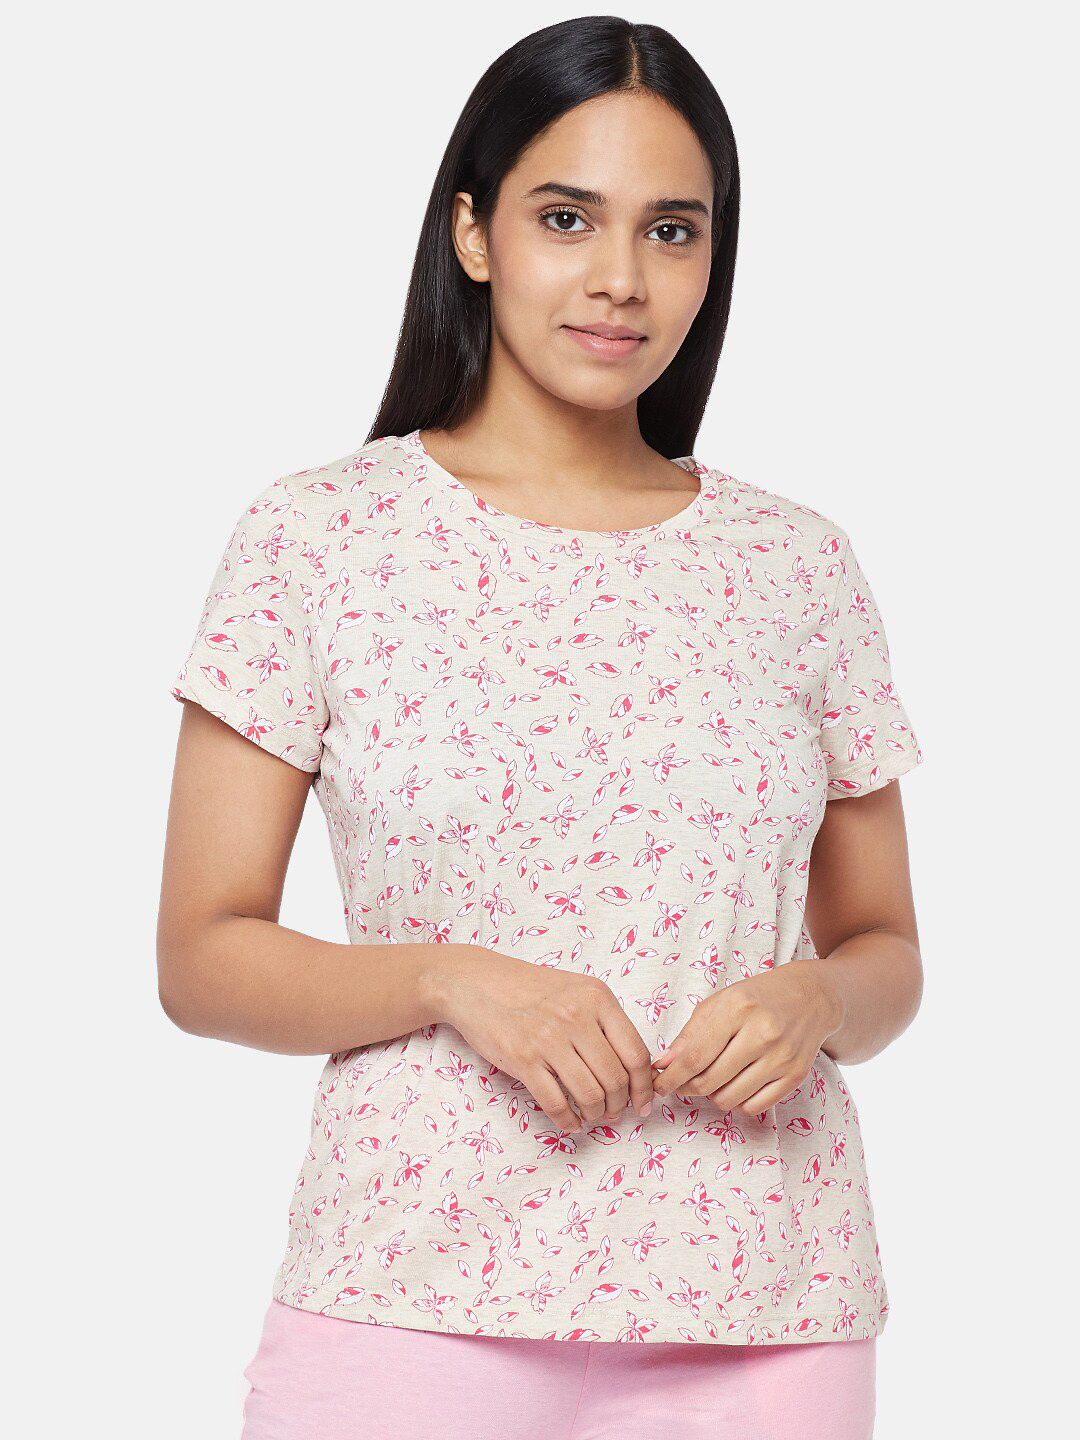 Dreamz by Pantaloons Women Beige & Pink Printed Lounge T-shirt Price in India